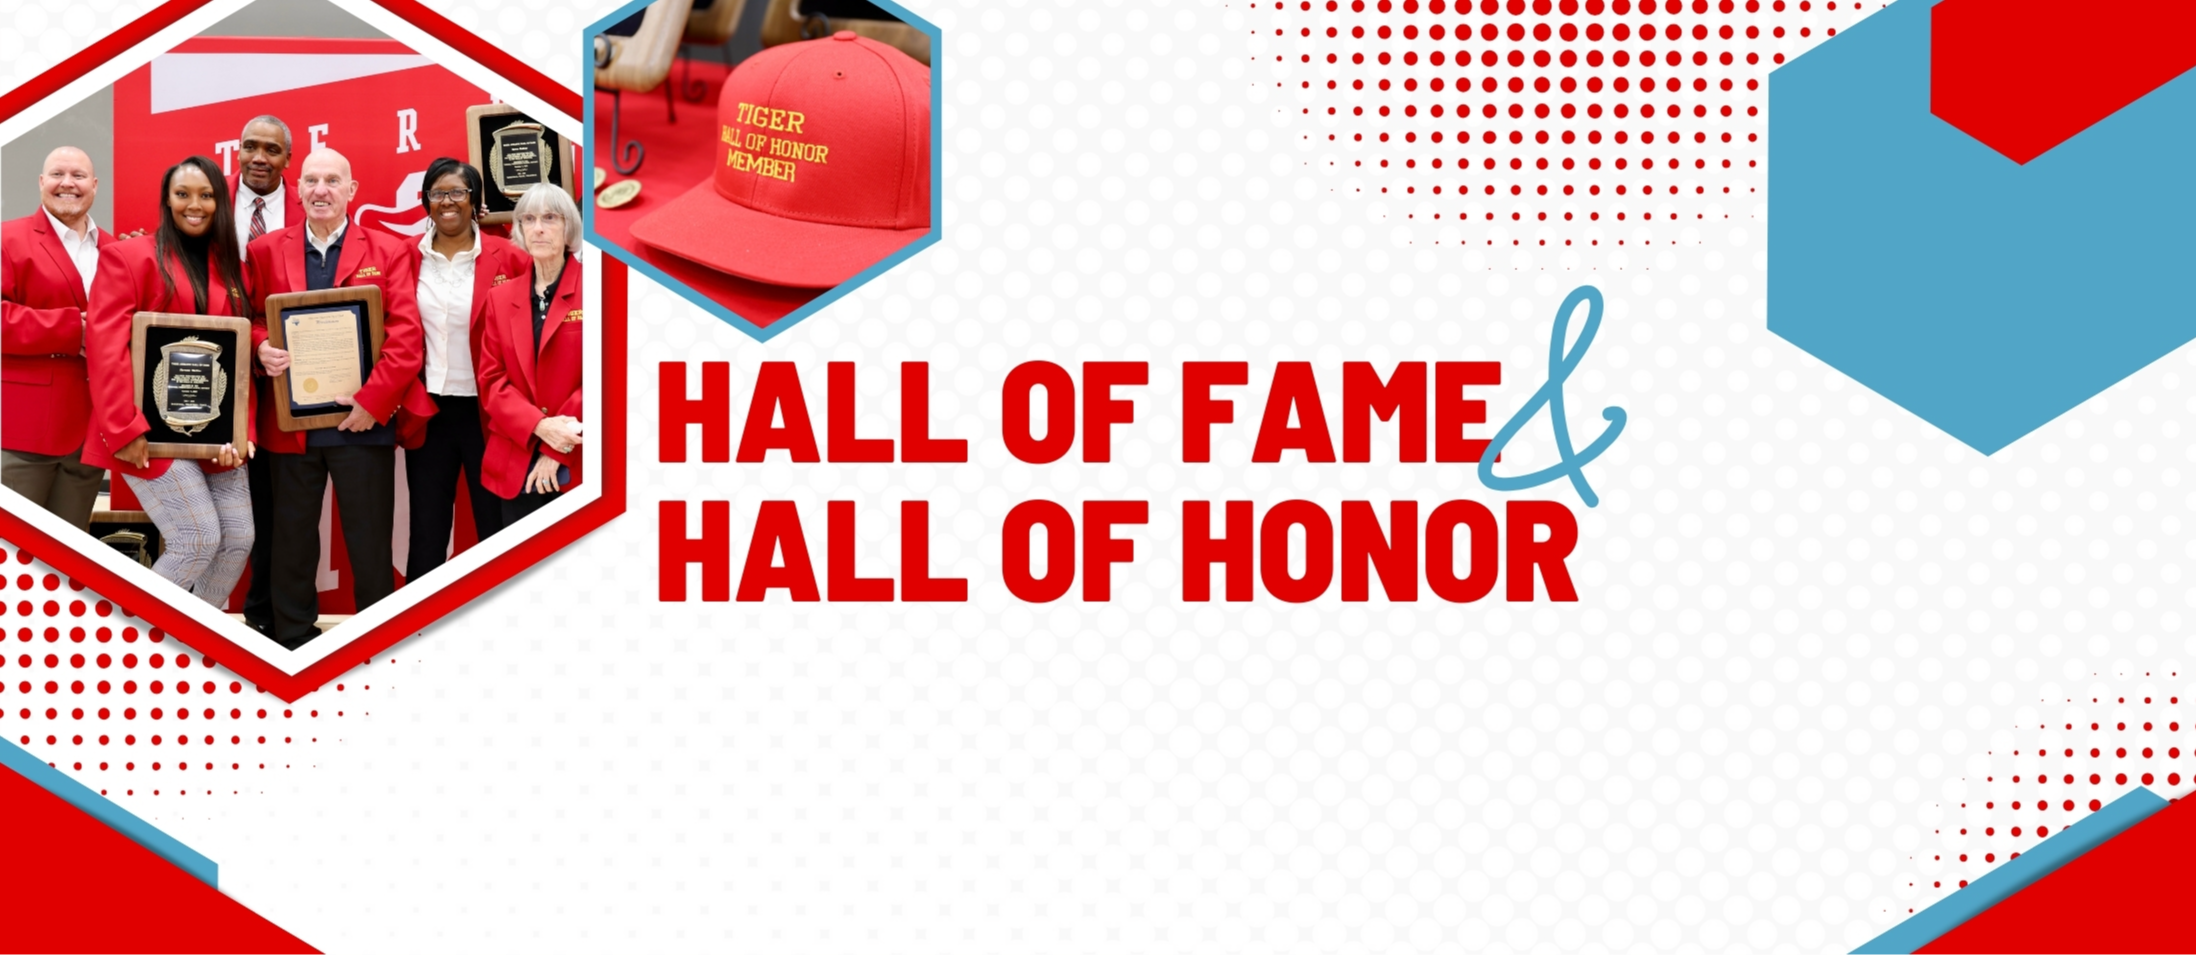 Hall of Fame and Honor